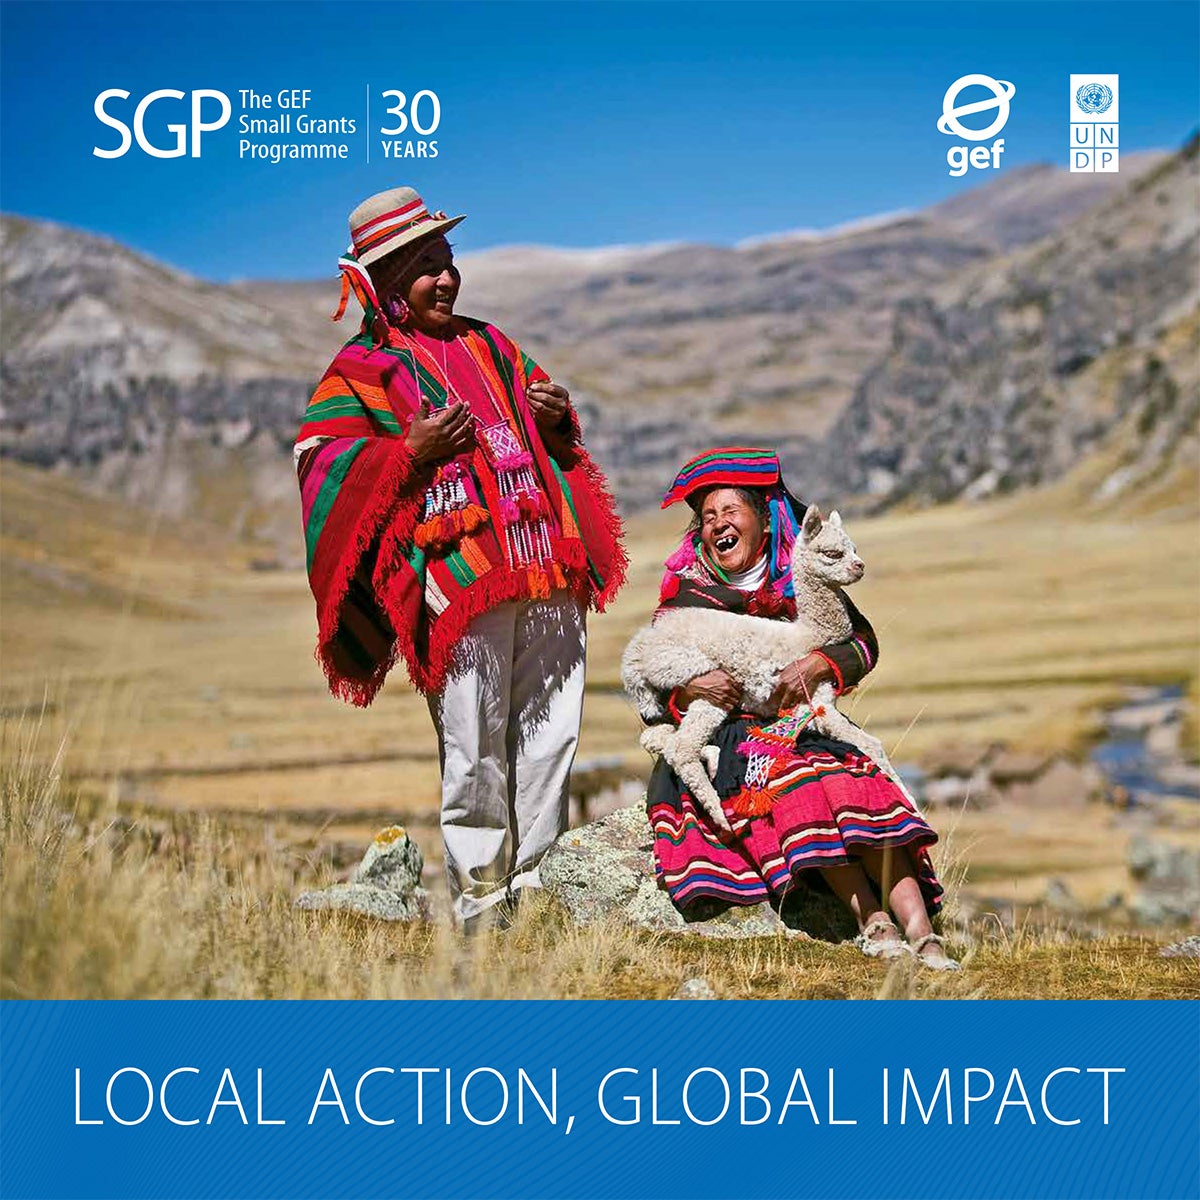 Cover image for publication "Local Action, Global Impact"